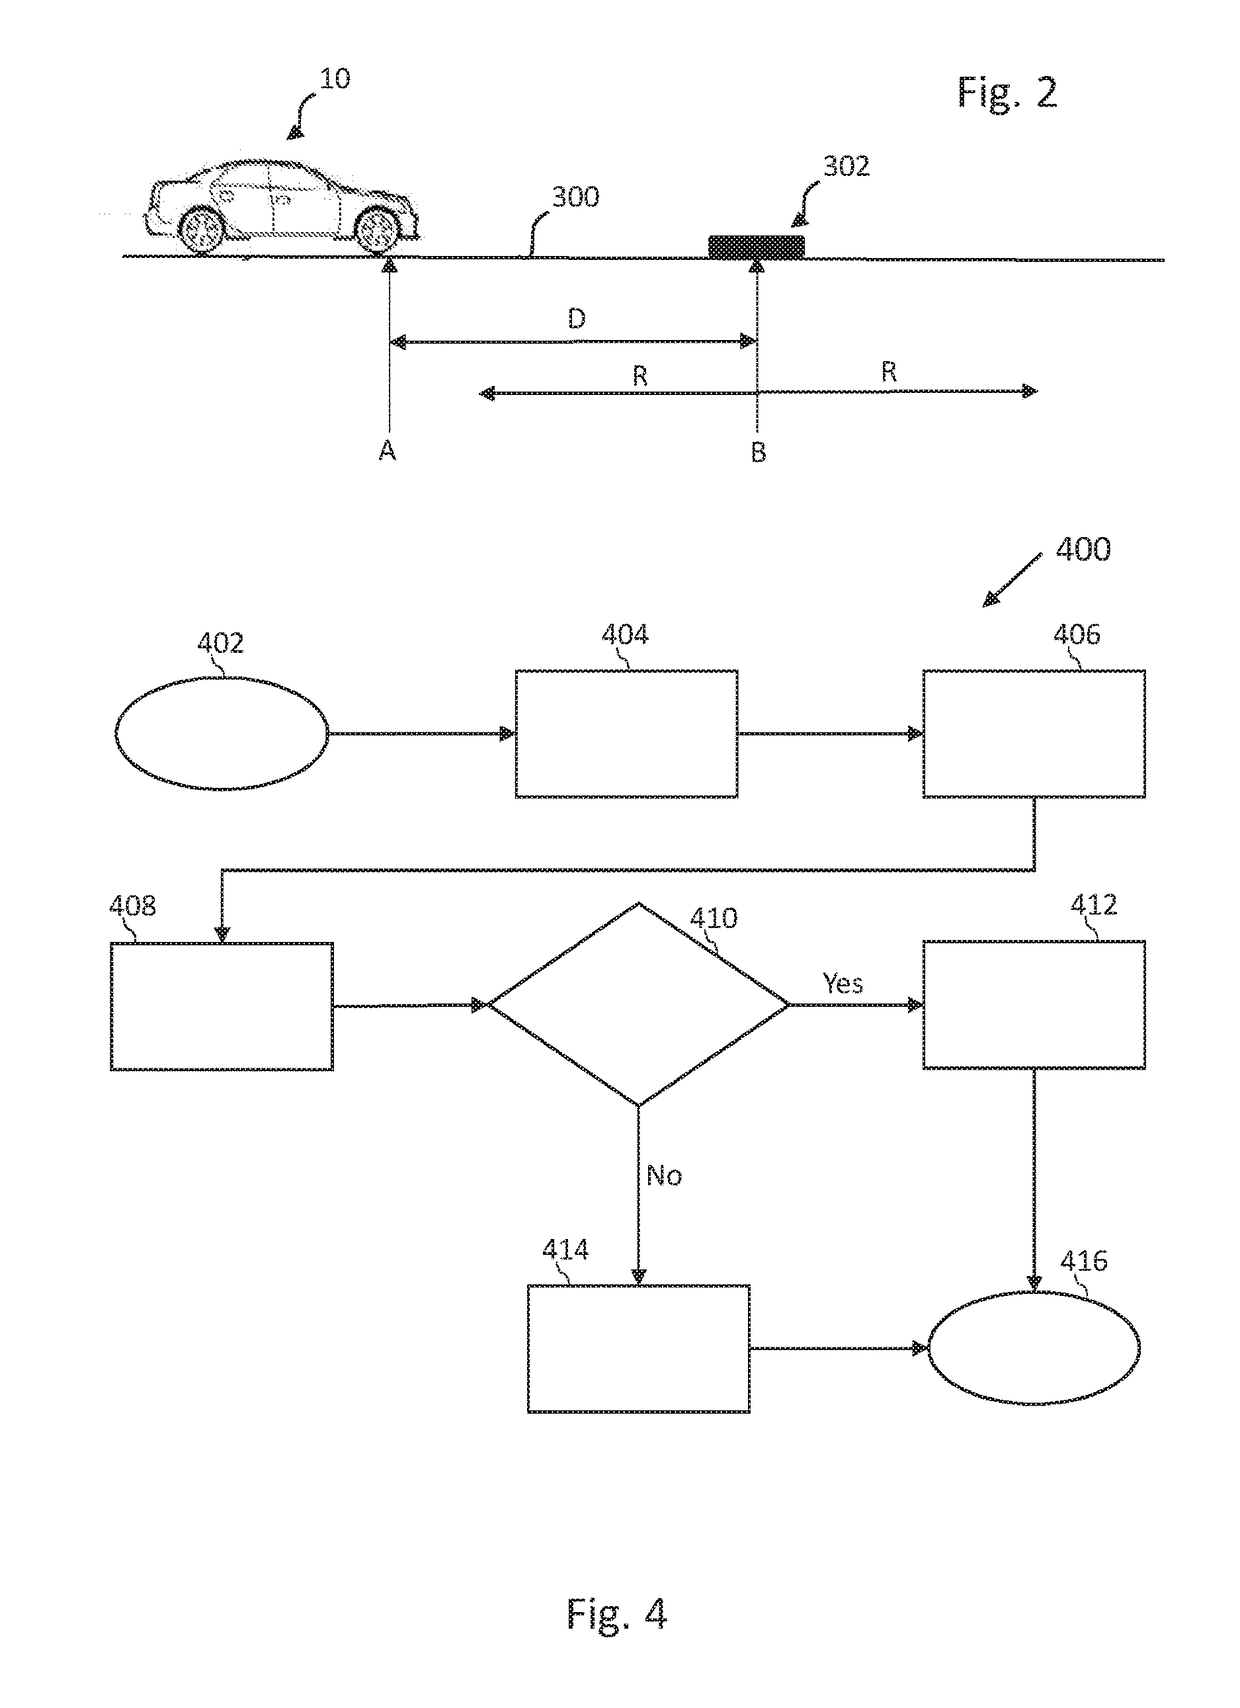 Methods And Systems To Calculate And Store GPS Coordinates Of Location-Based Features